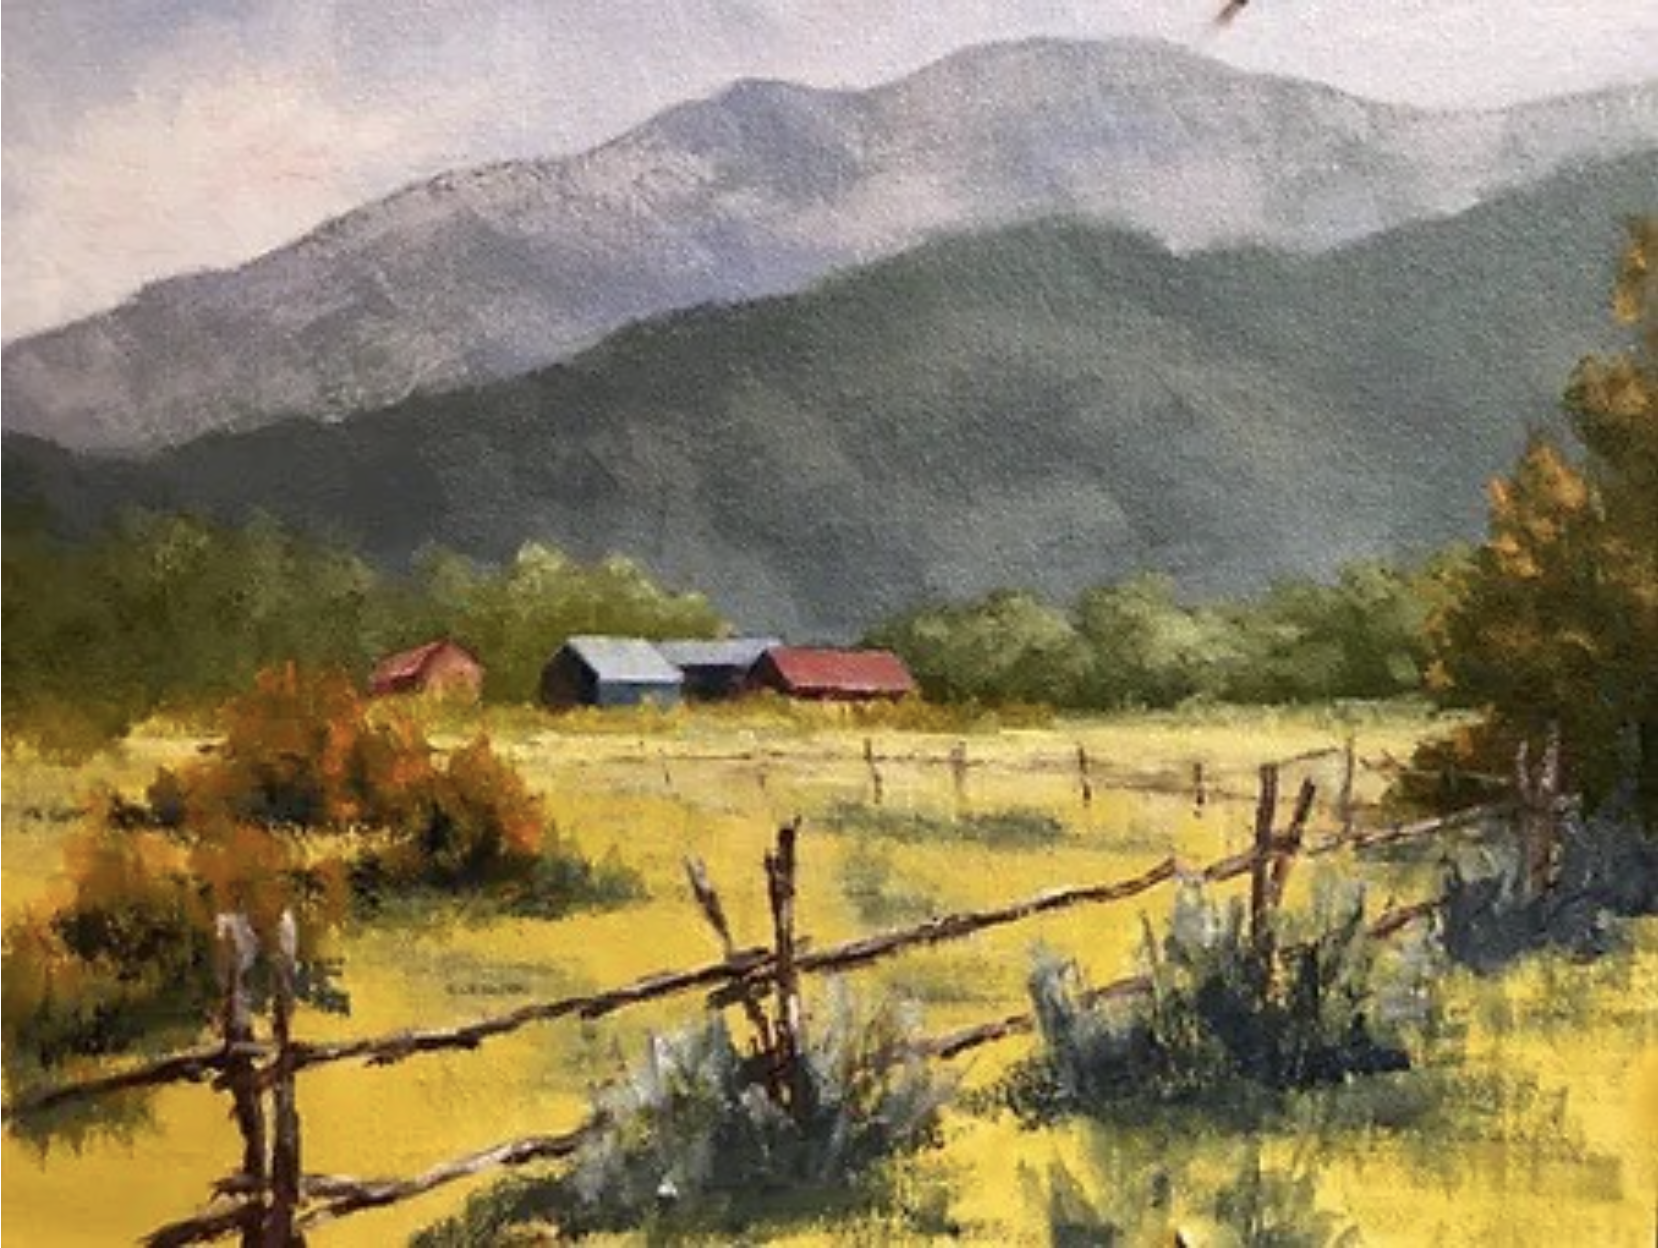 Clickable Image: Intermediate Painting, Jonathan Vordermark, Taos, New Mexico, summer workshop, New Mexico, southwest